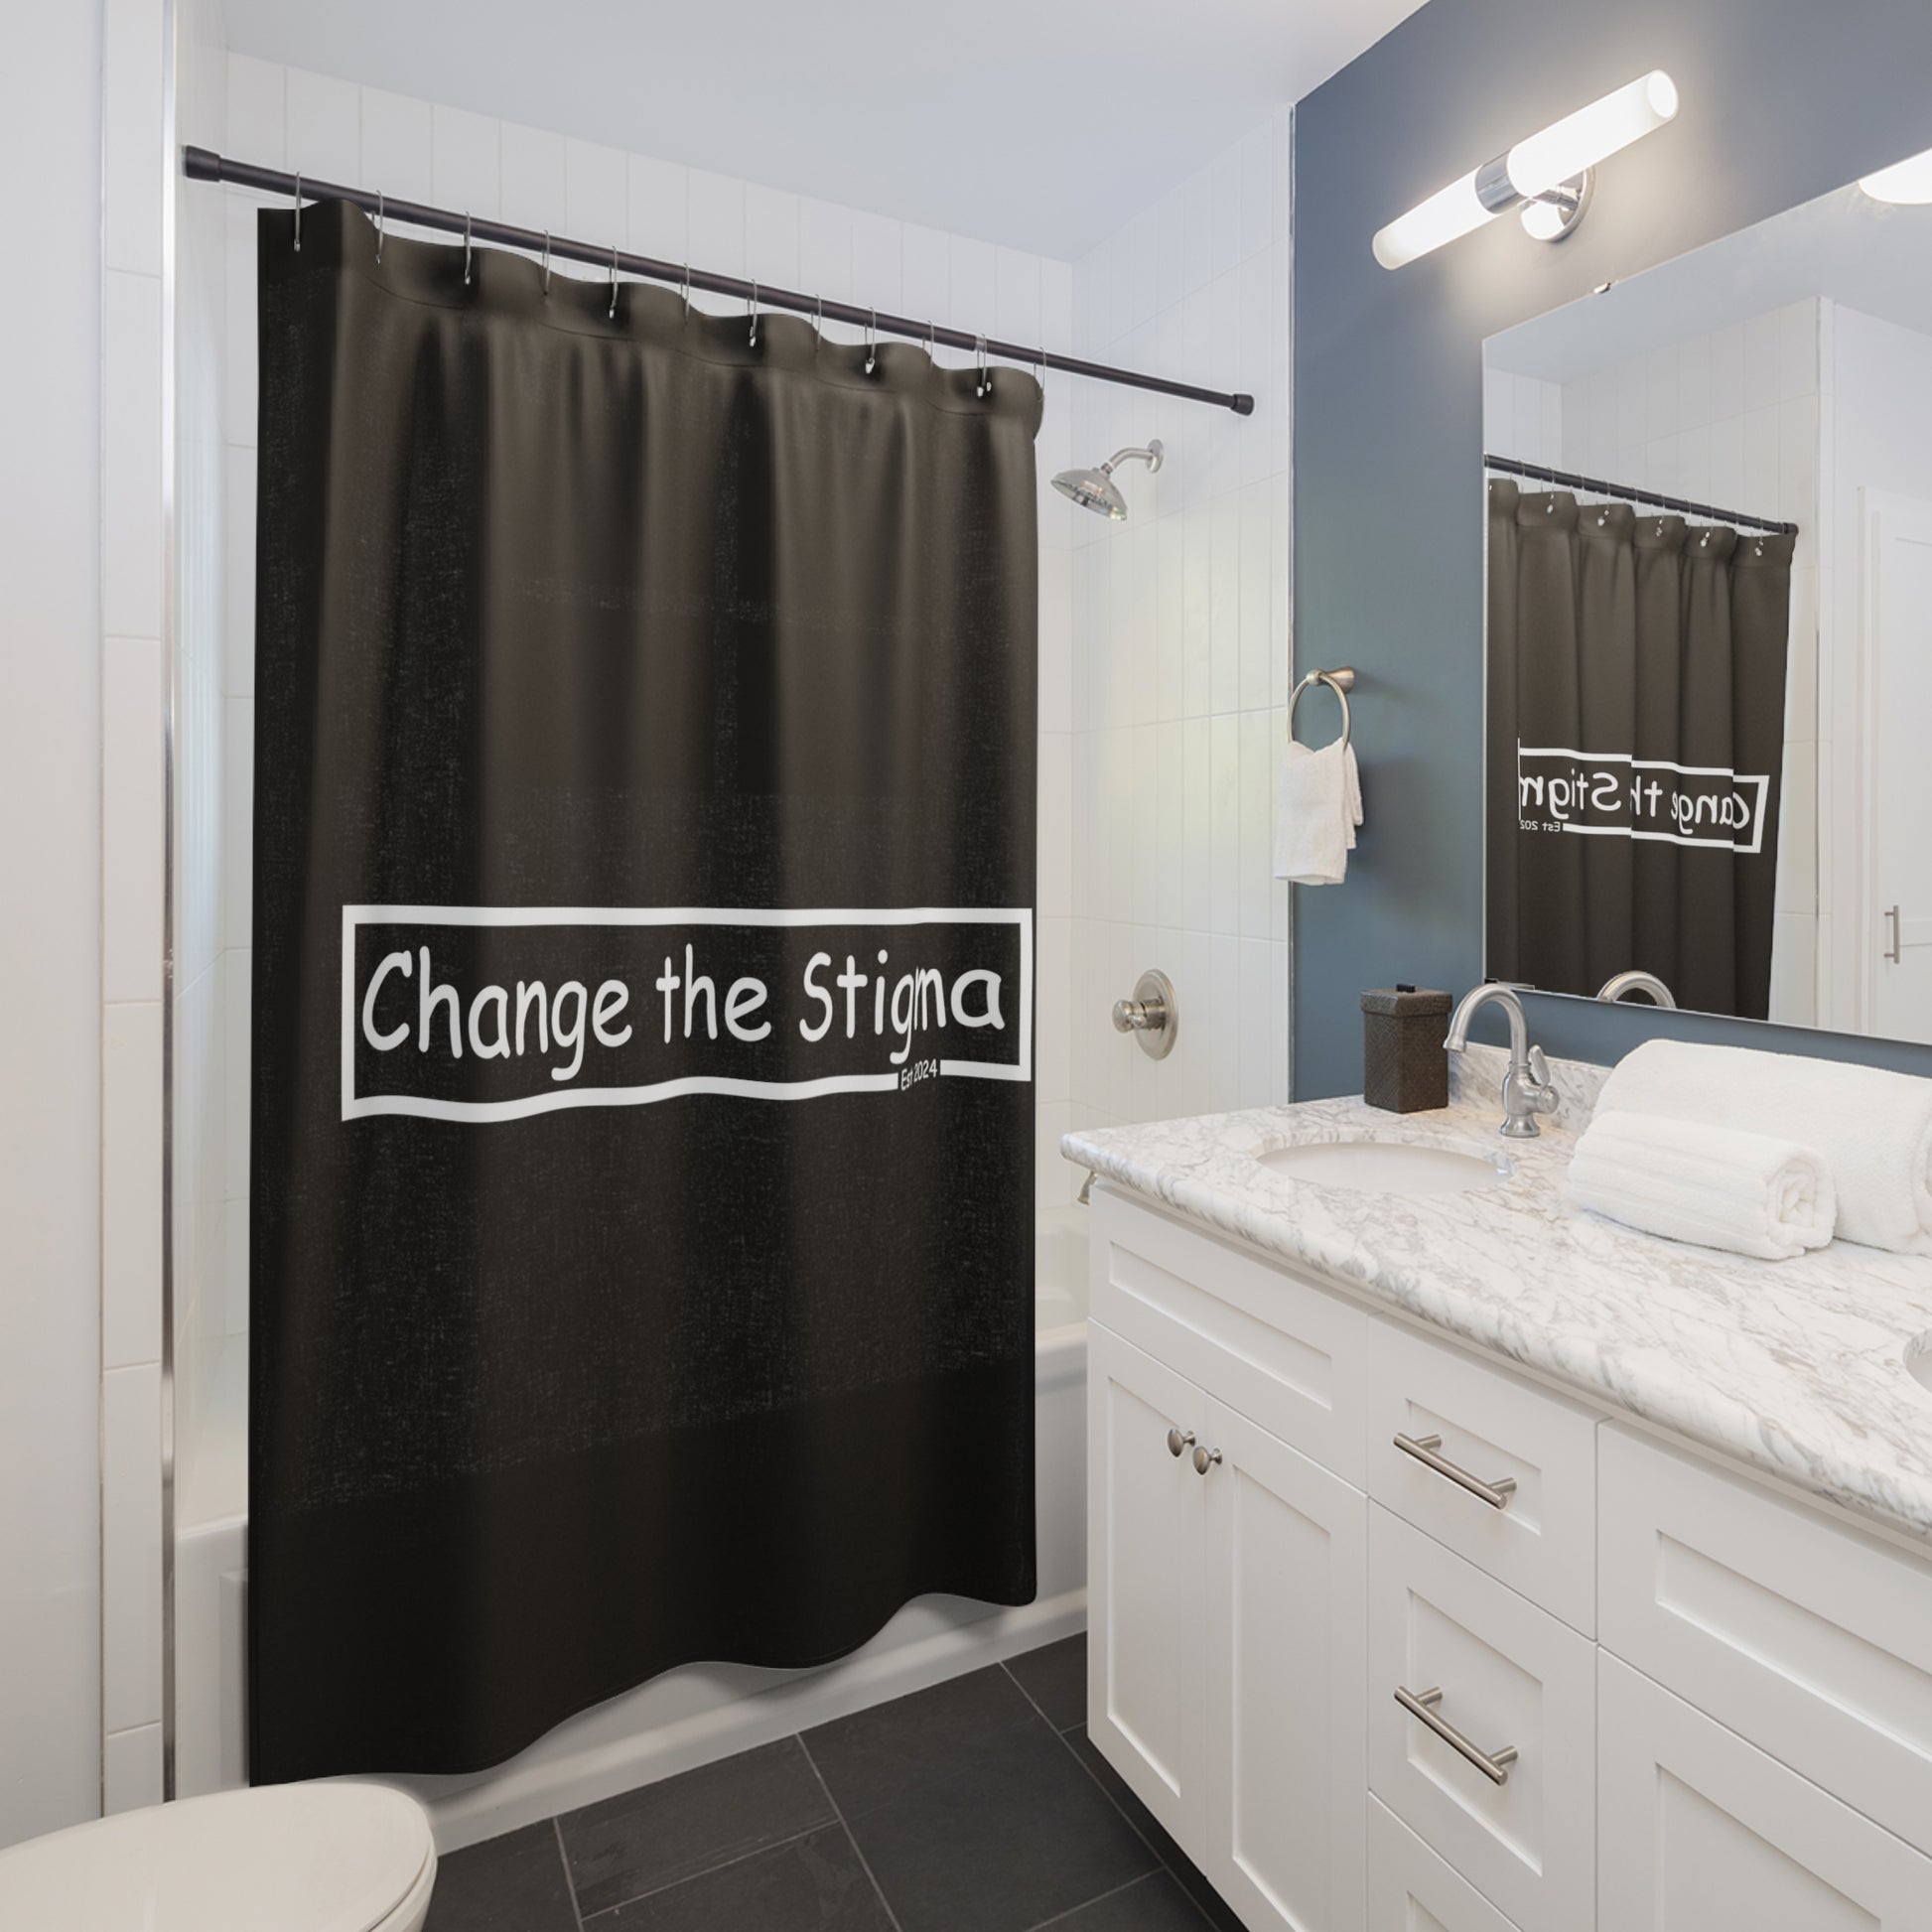 71"x74" Black shower curtain, front side in a bathroom, shows the words "Change the Stigma".